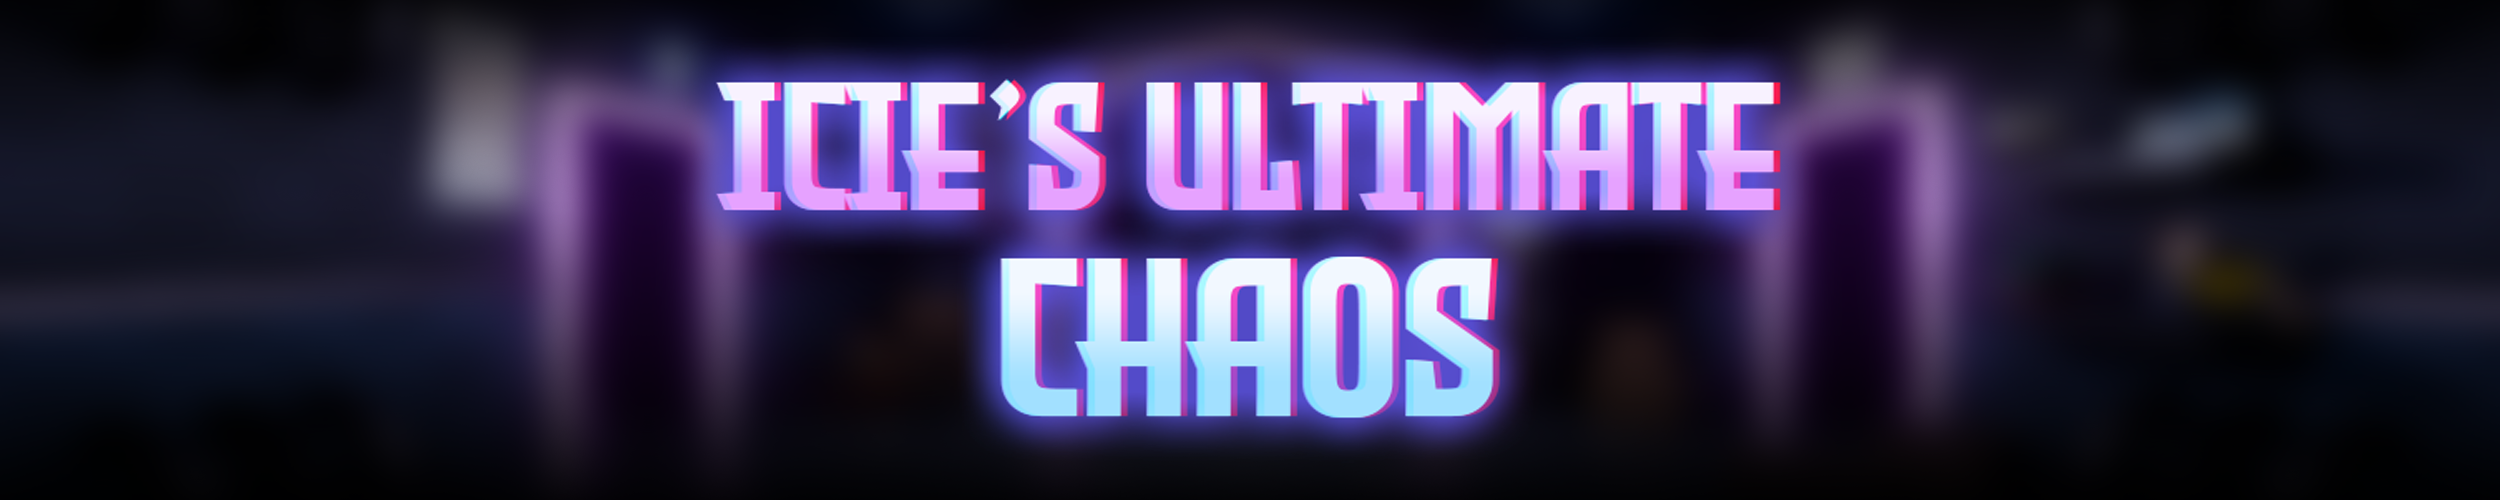 Icie's Ultimate Chaos: The Game